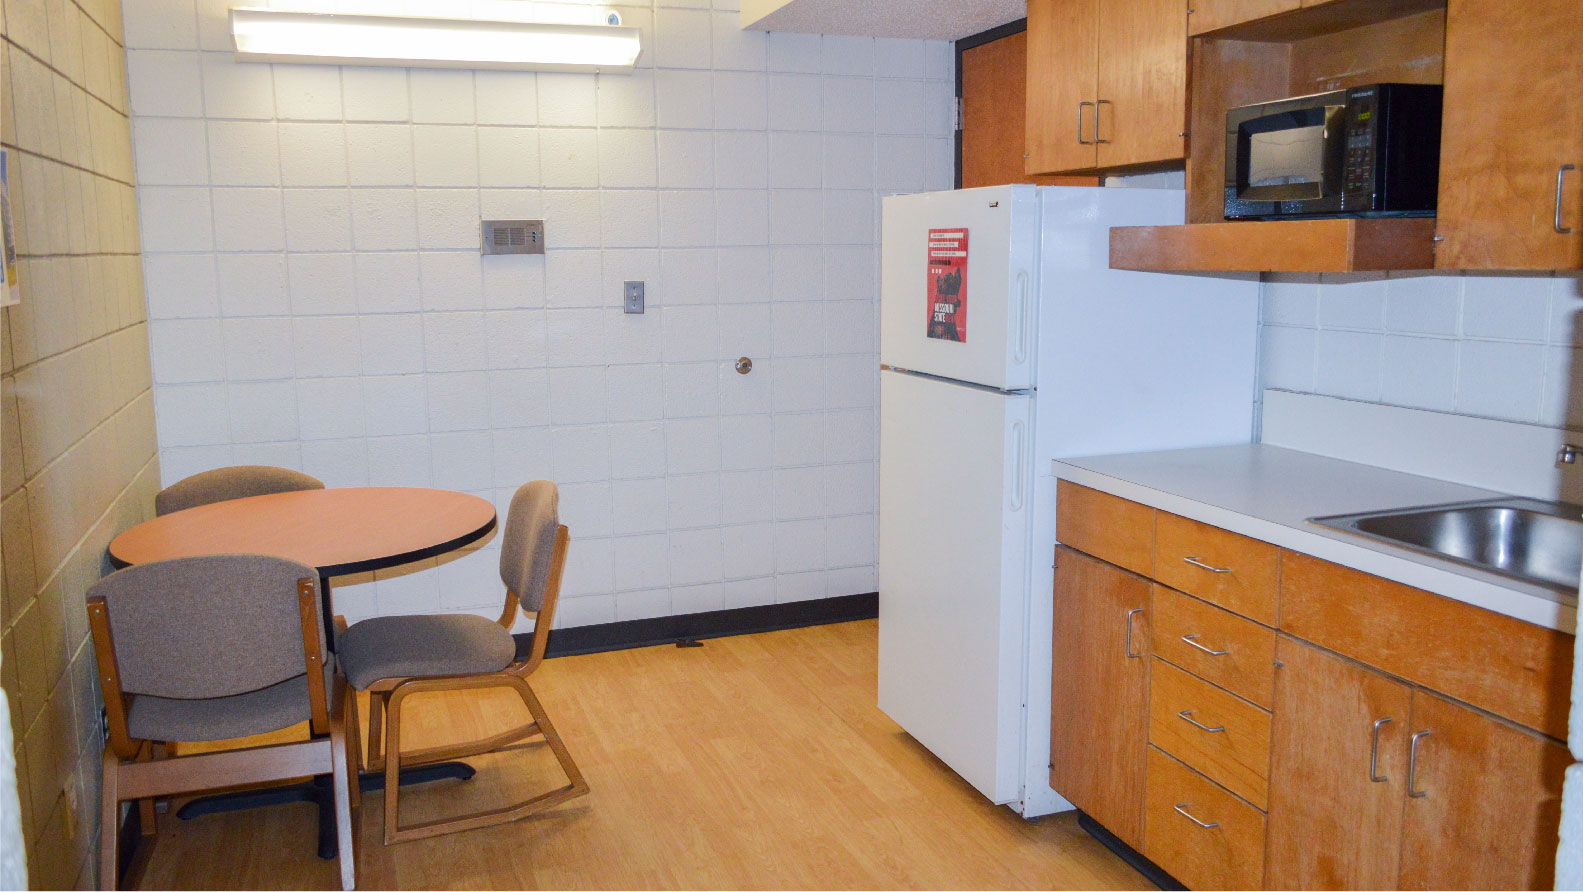 Hutchens 4-person suite kitchen and dining area with table and 4 chairs refrigerator microwave sink 